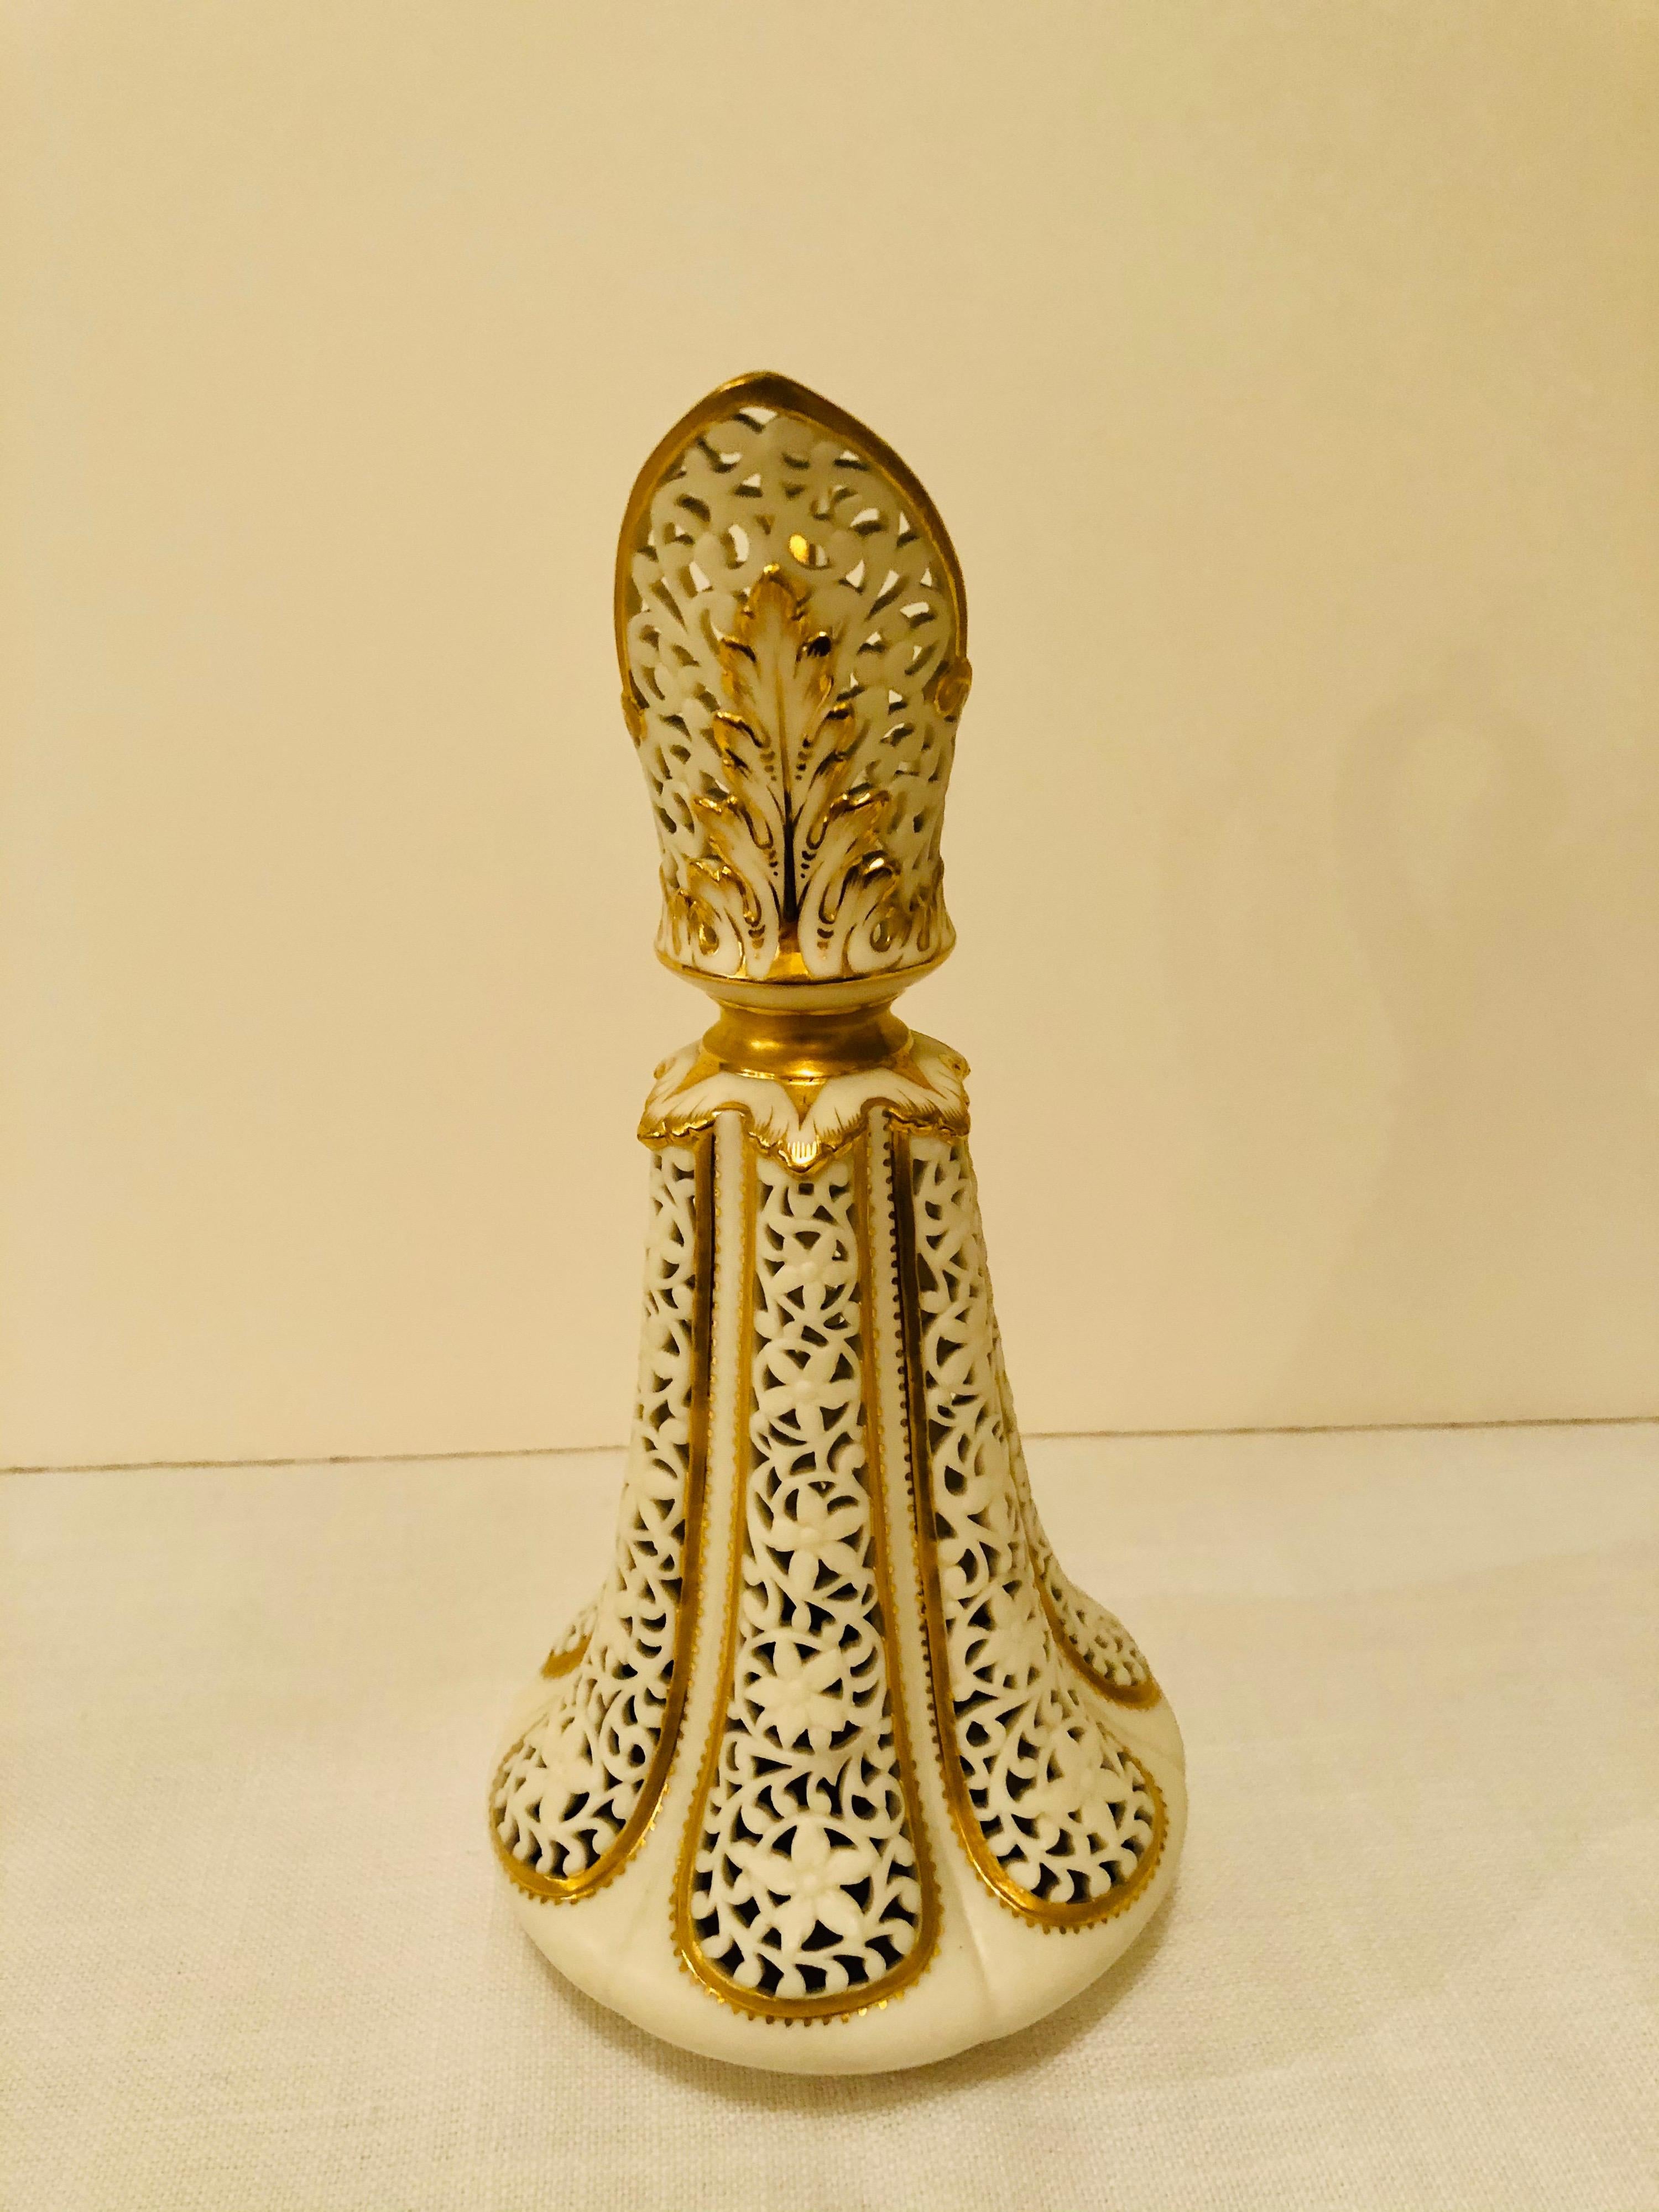 Grainger and Company Worcester Elaborately Reticulated Vase with Gilded Accents 1